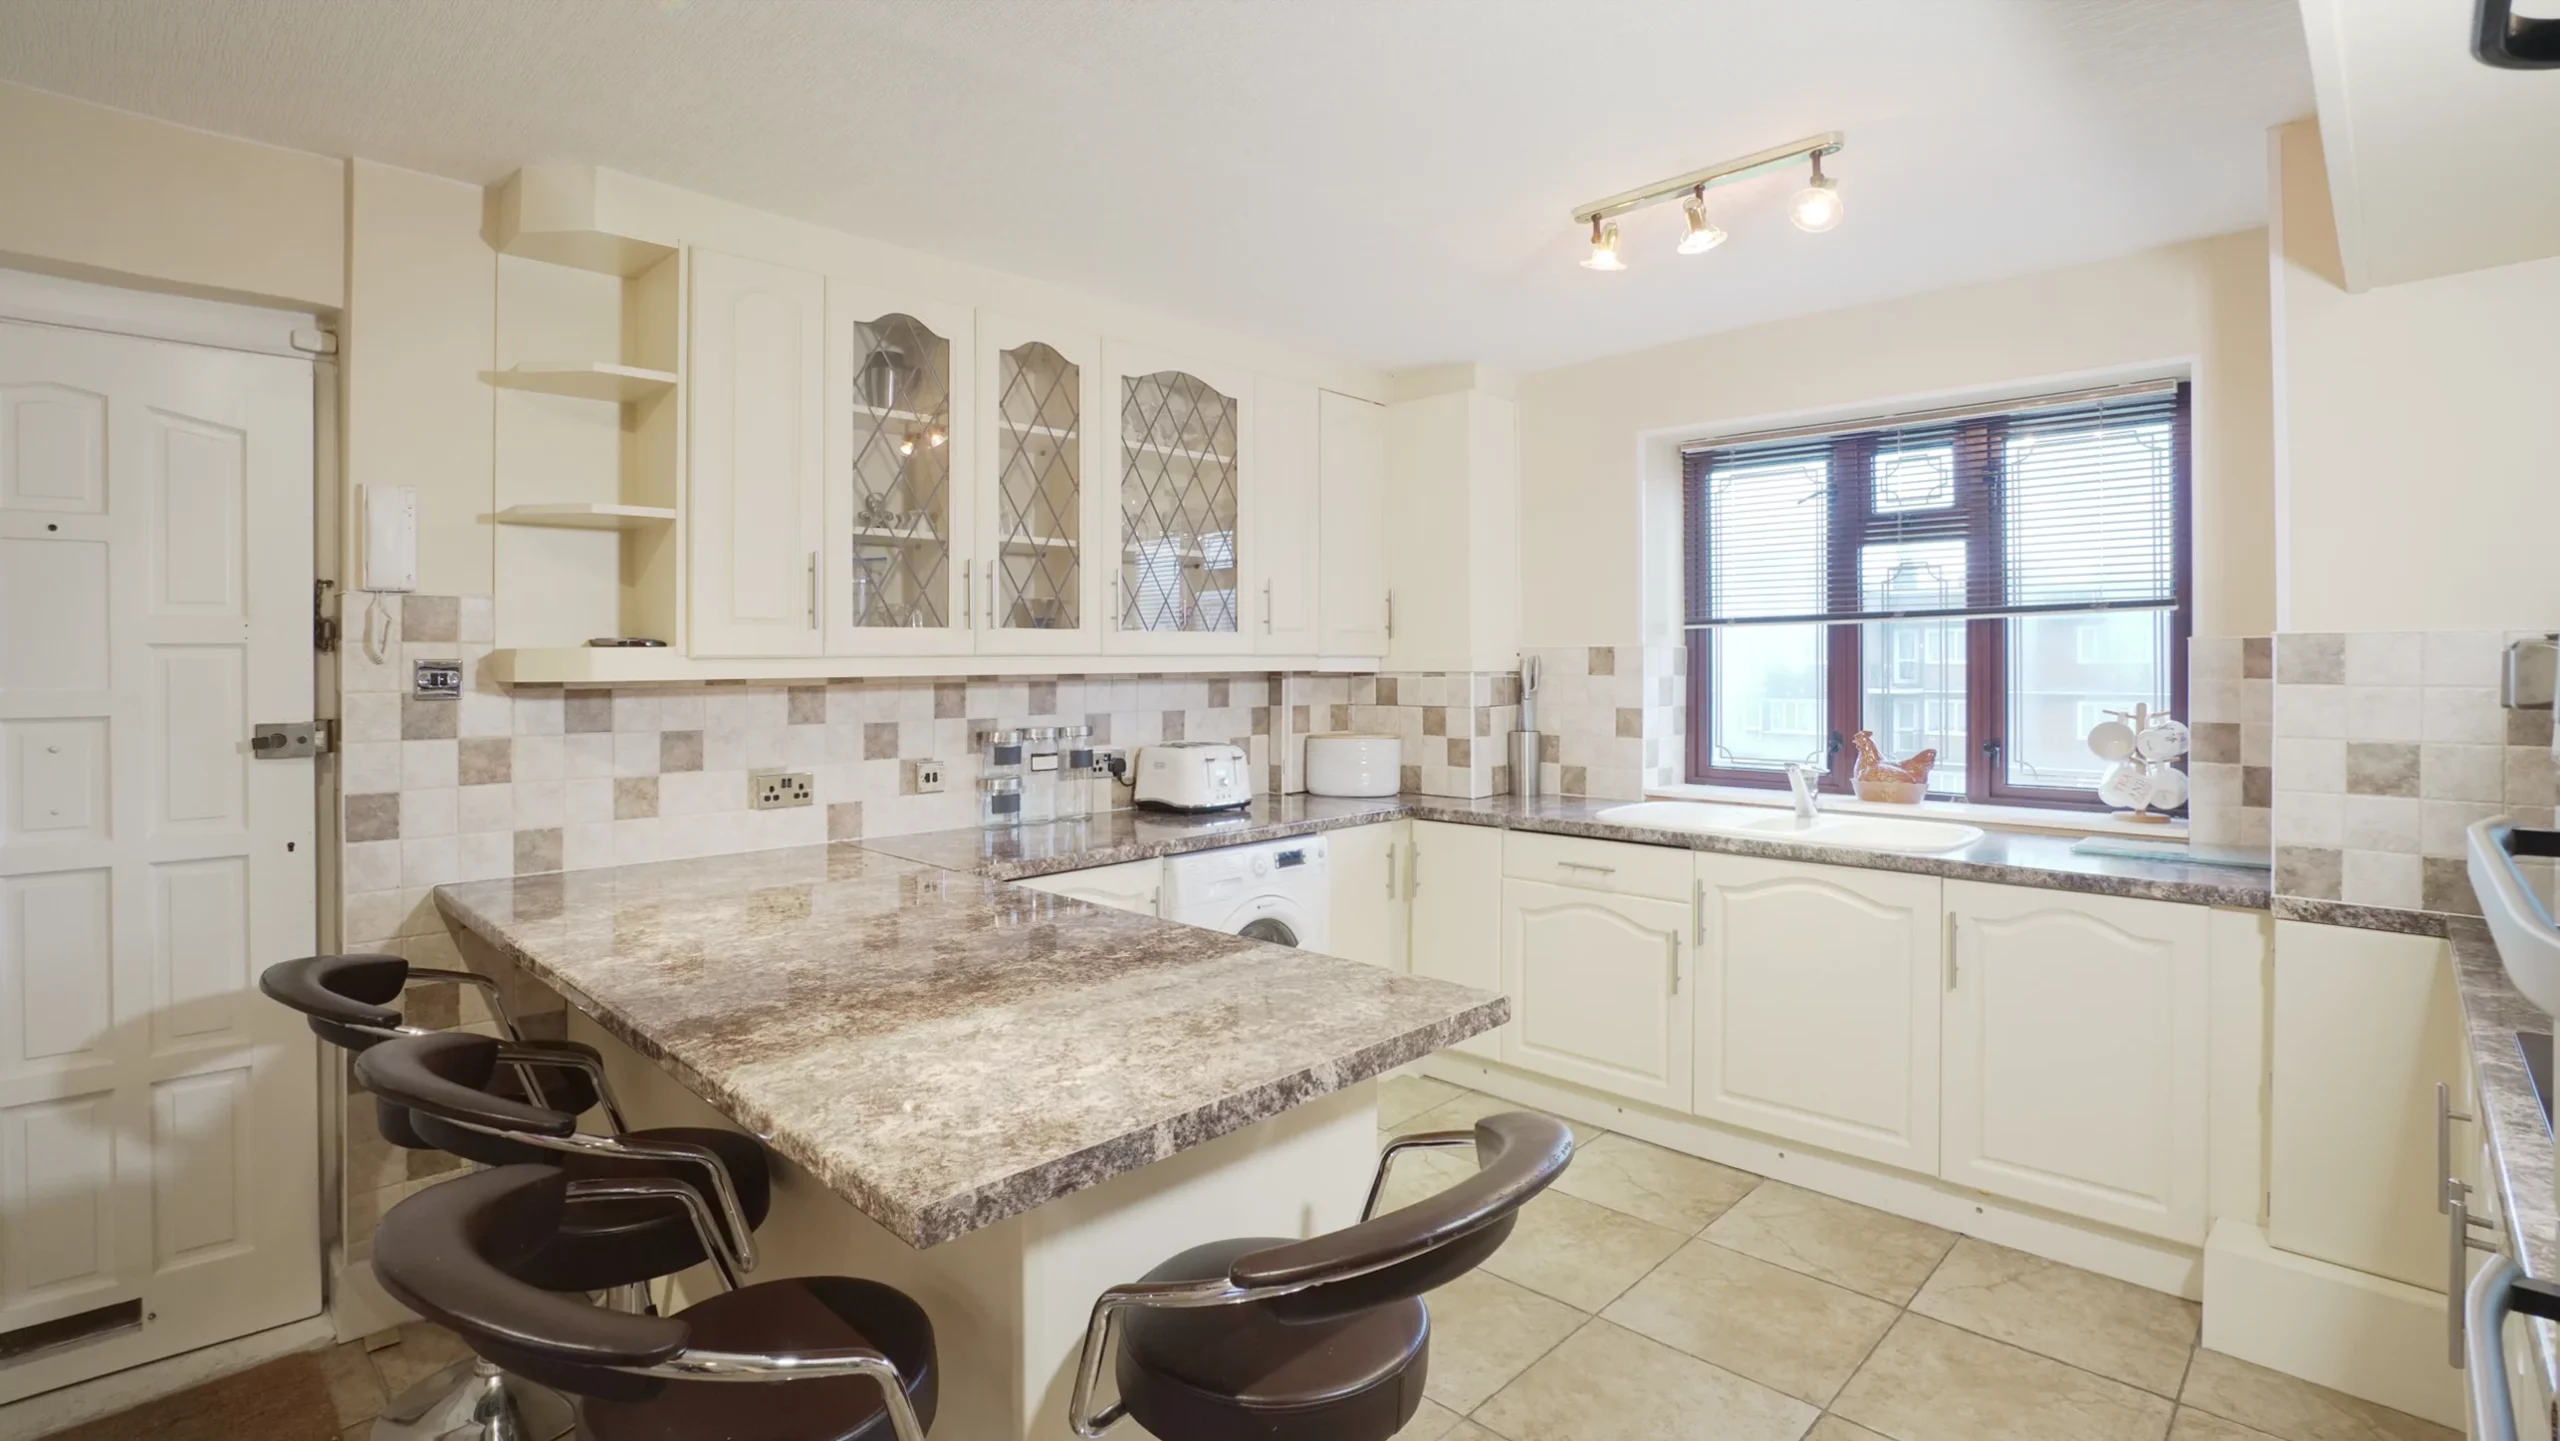 Three Bedroom flat Located in Limehouse